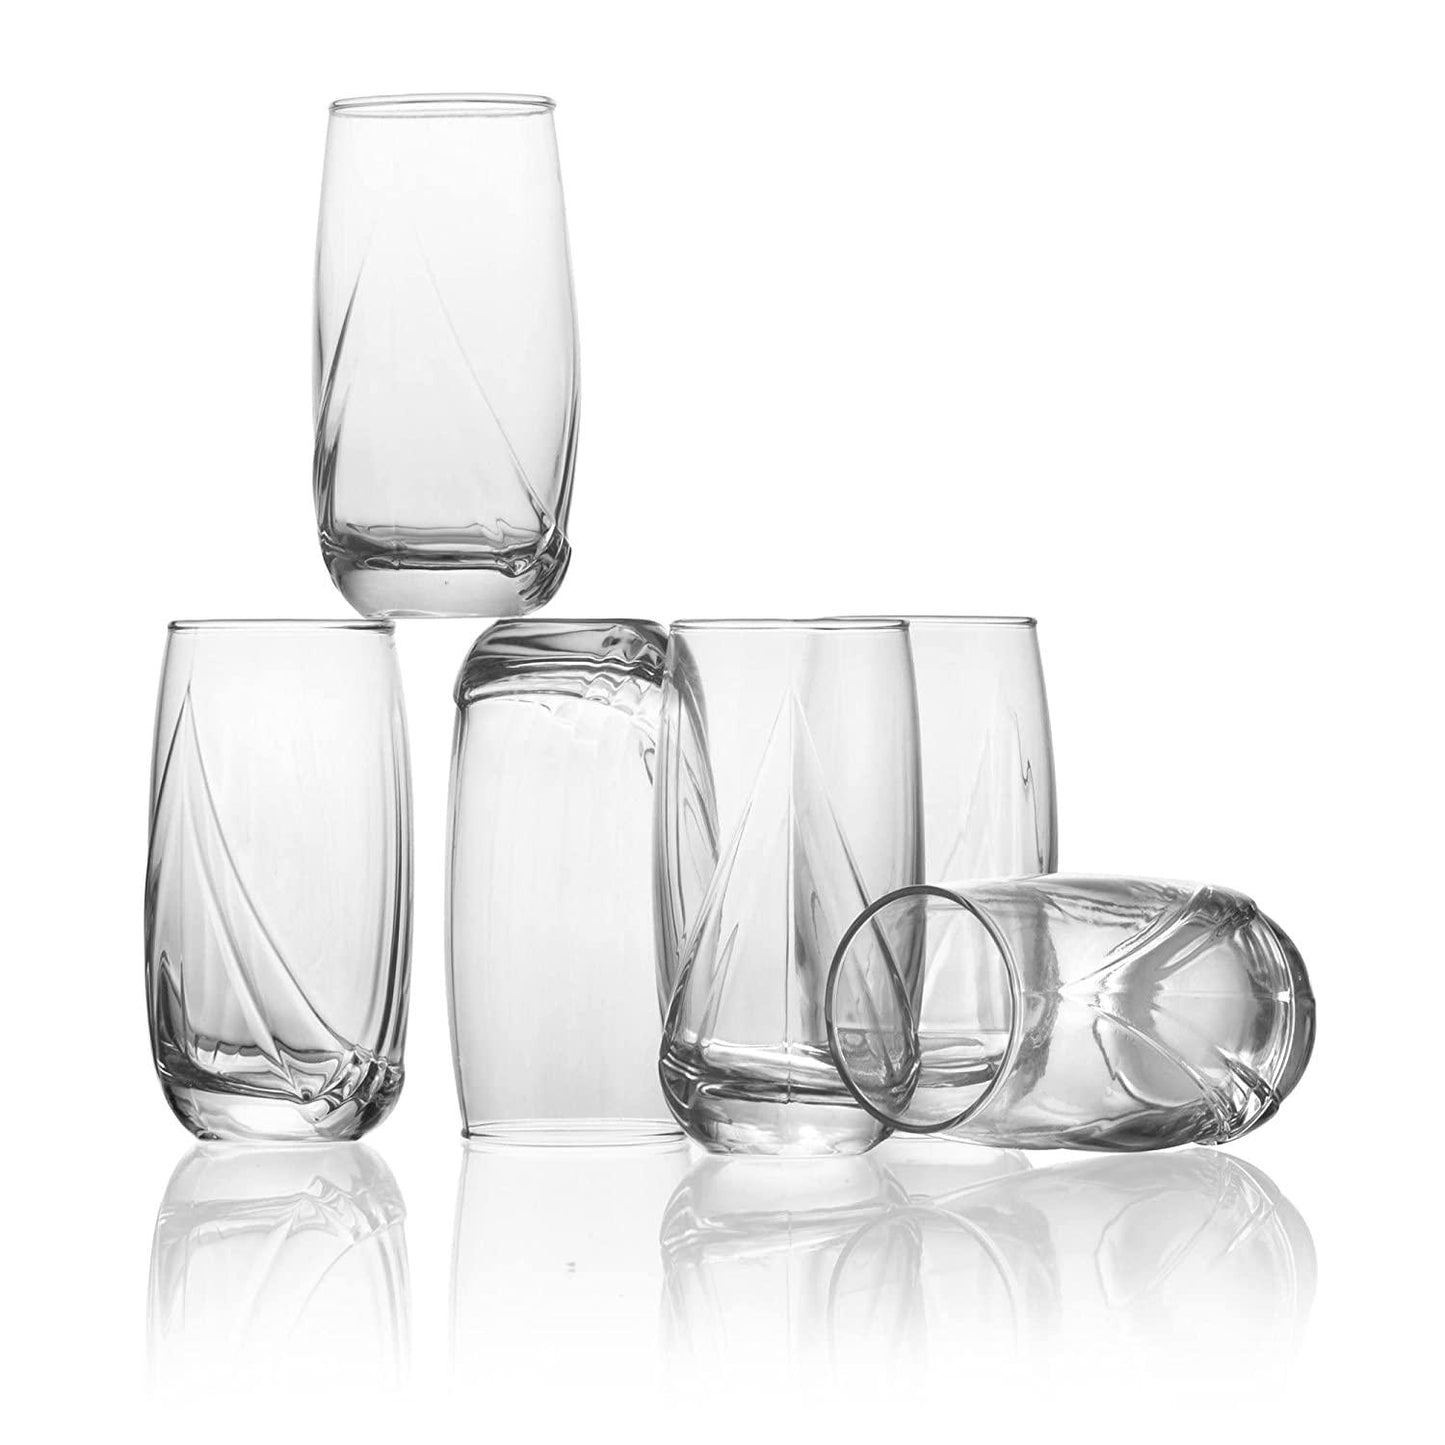 Durable Beverage Glassware - Ideal for everyday use.